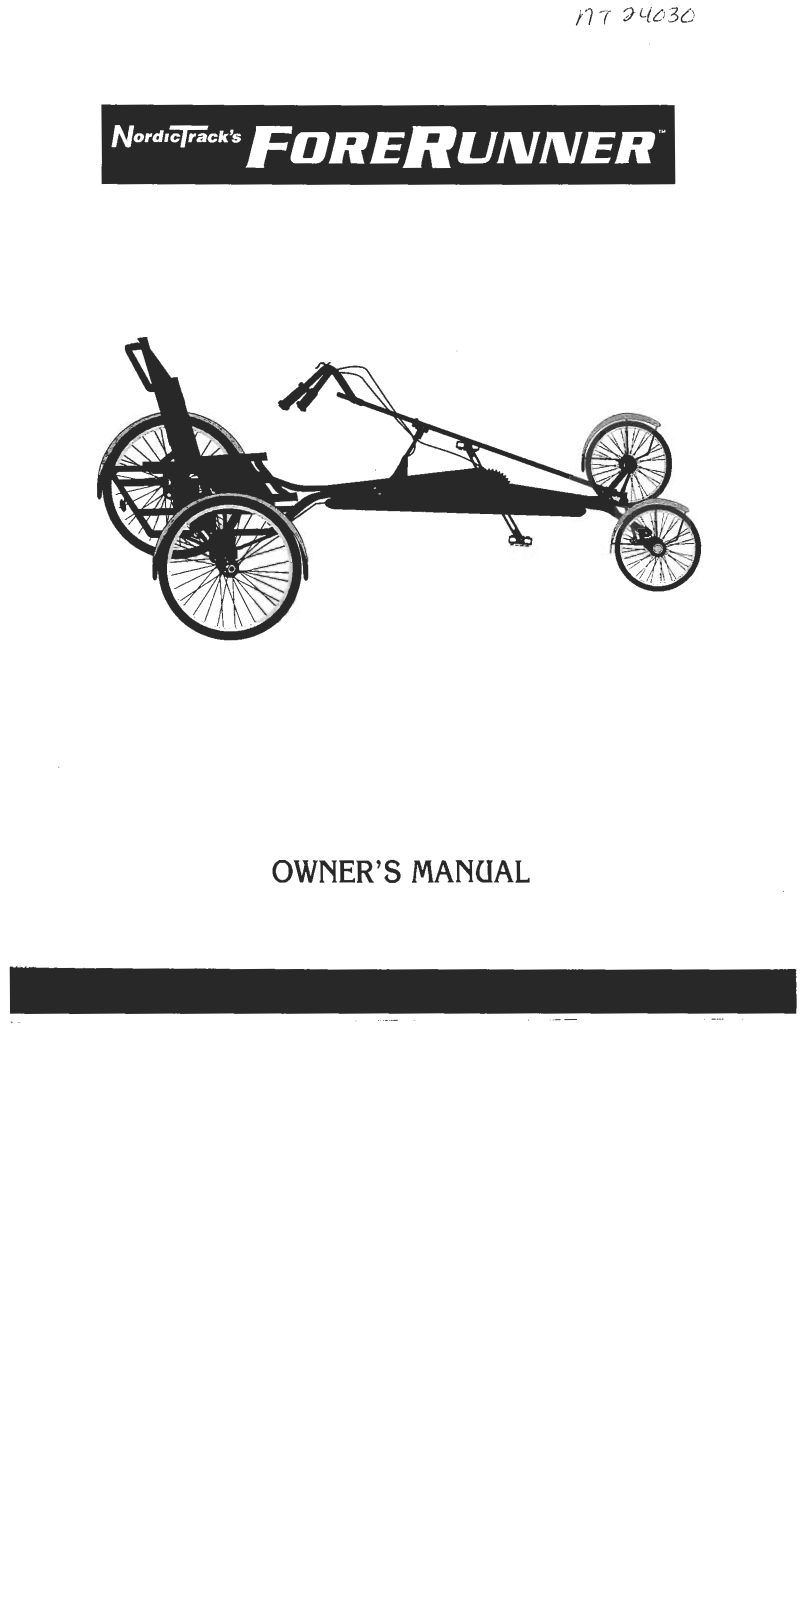 NordicTrack NT240300 Owner's Manual